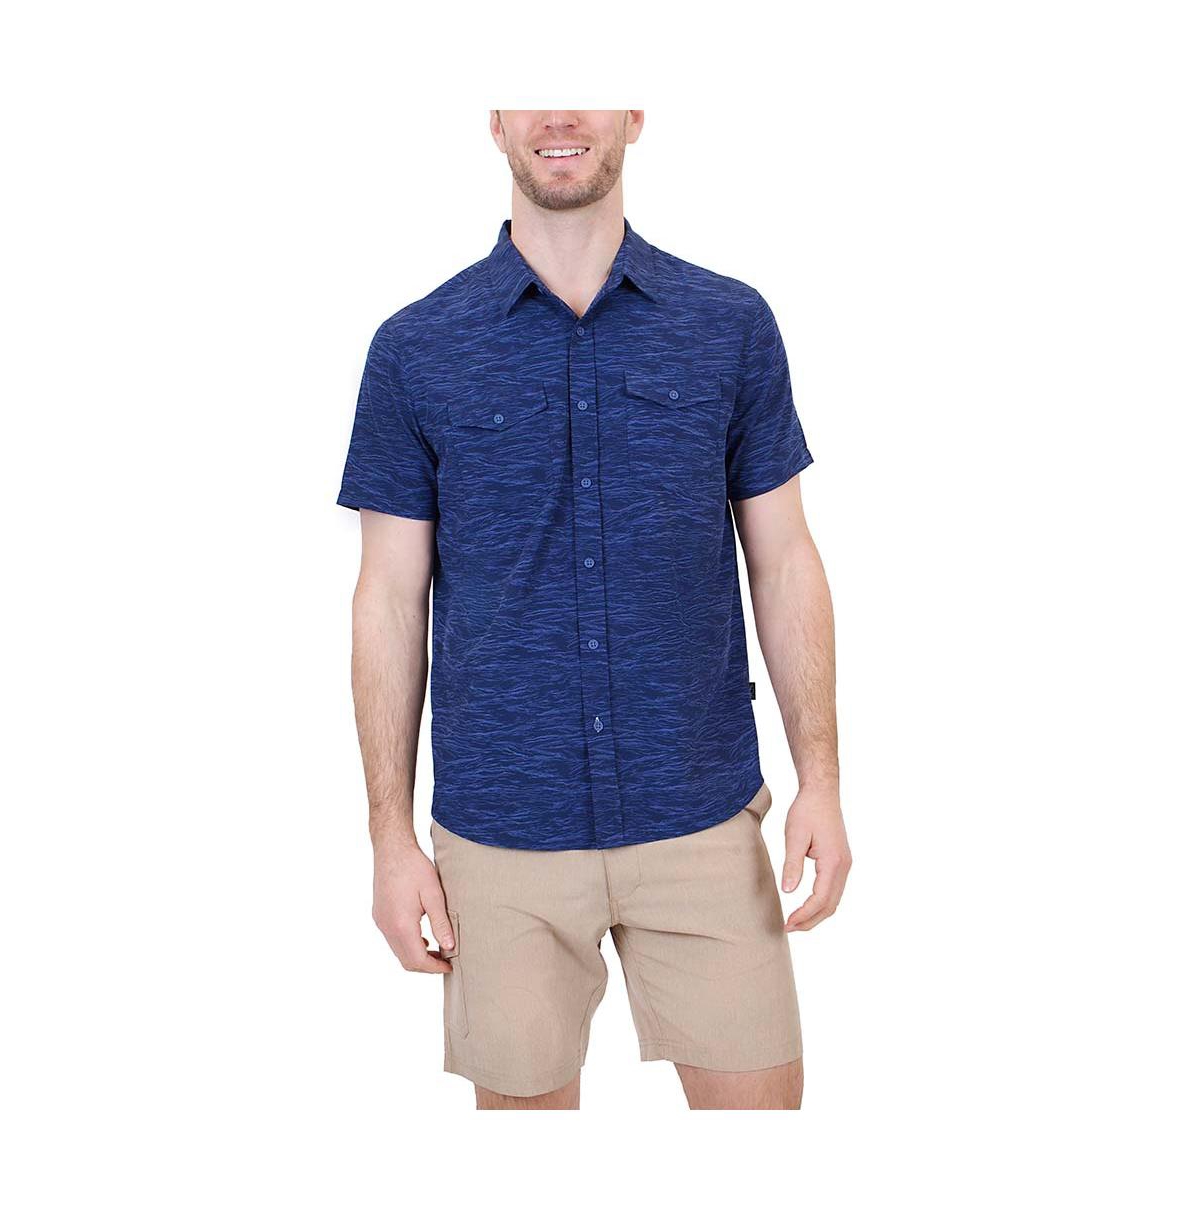 Men's Two-Pocket Sun Protection Button Down Shirt - Midnight navy ocean waves